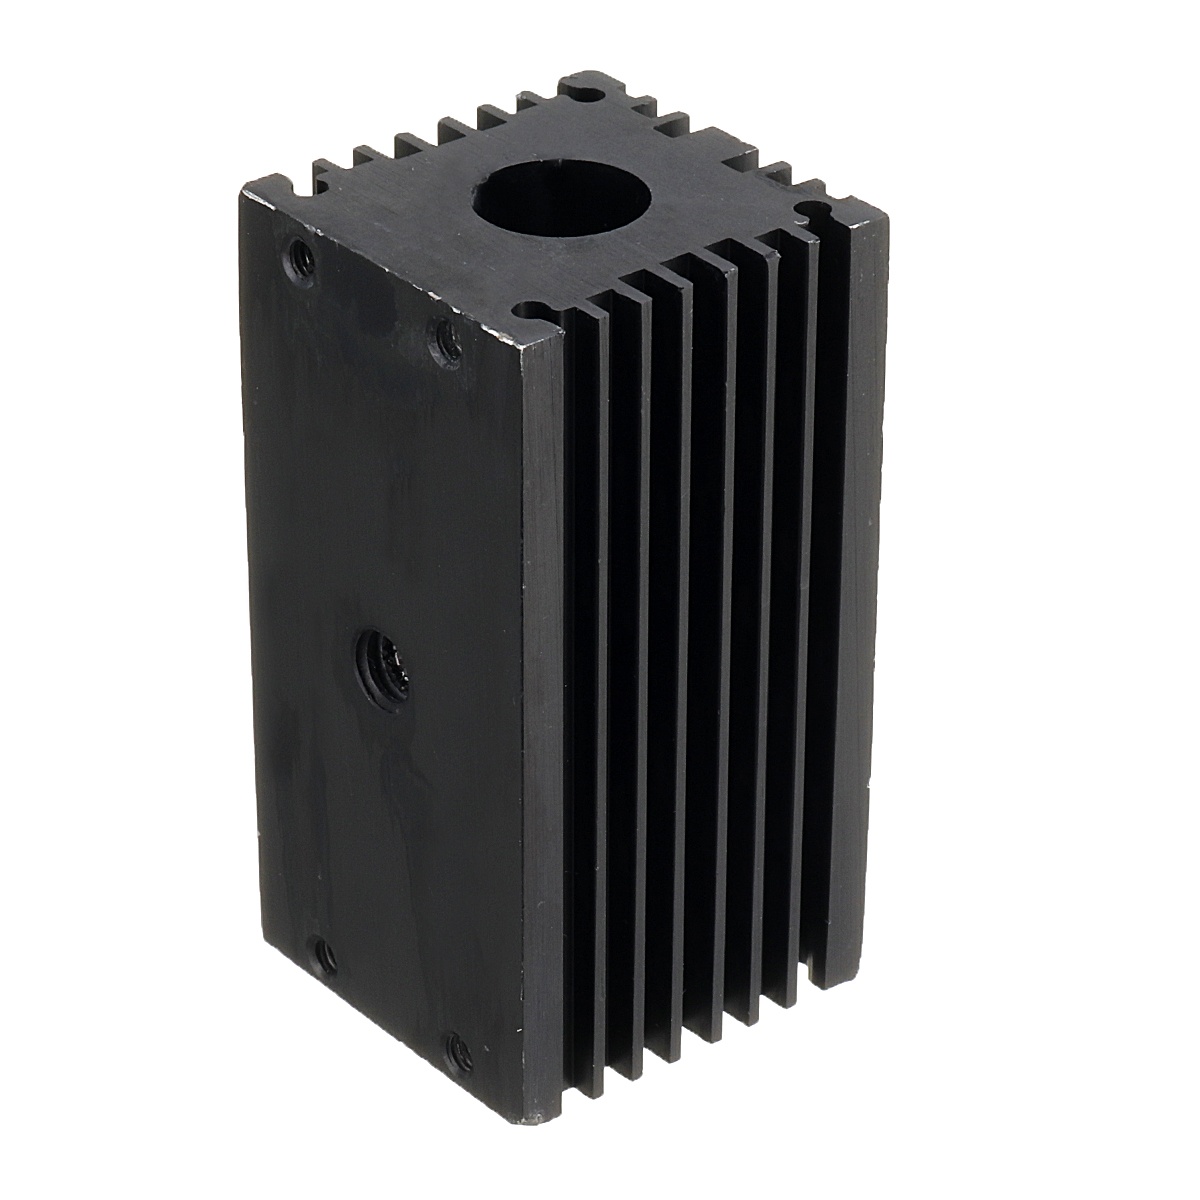 62x32x32mm 12mm Aluminum Heat Sink Groove Fixed Radiator Seat for 12mm Laser Diode Module 12